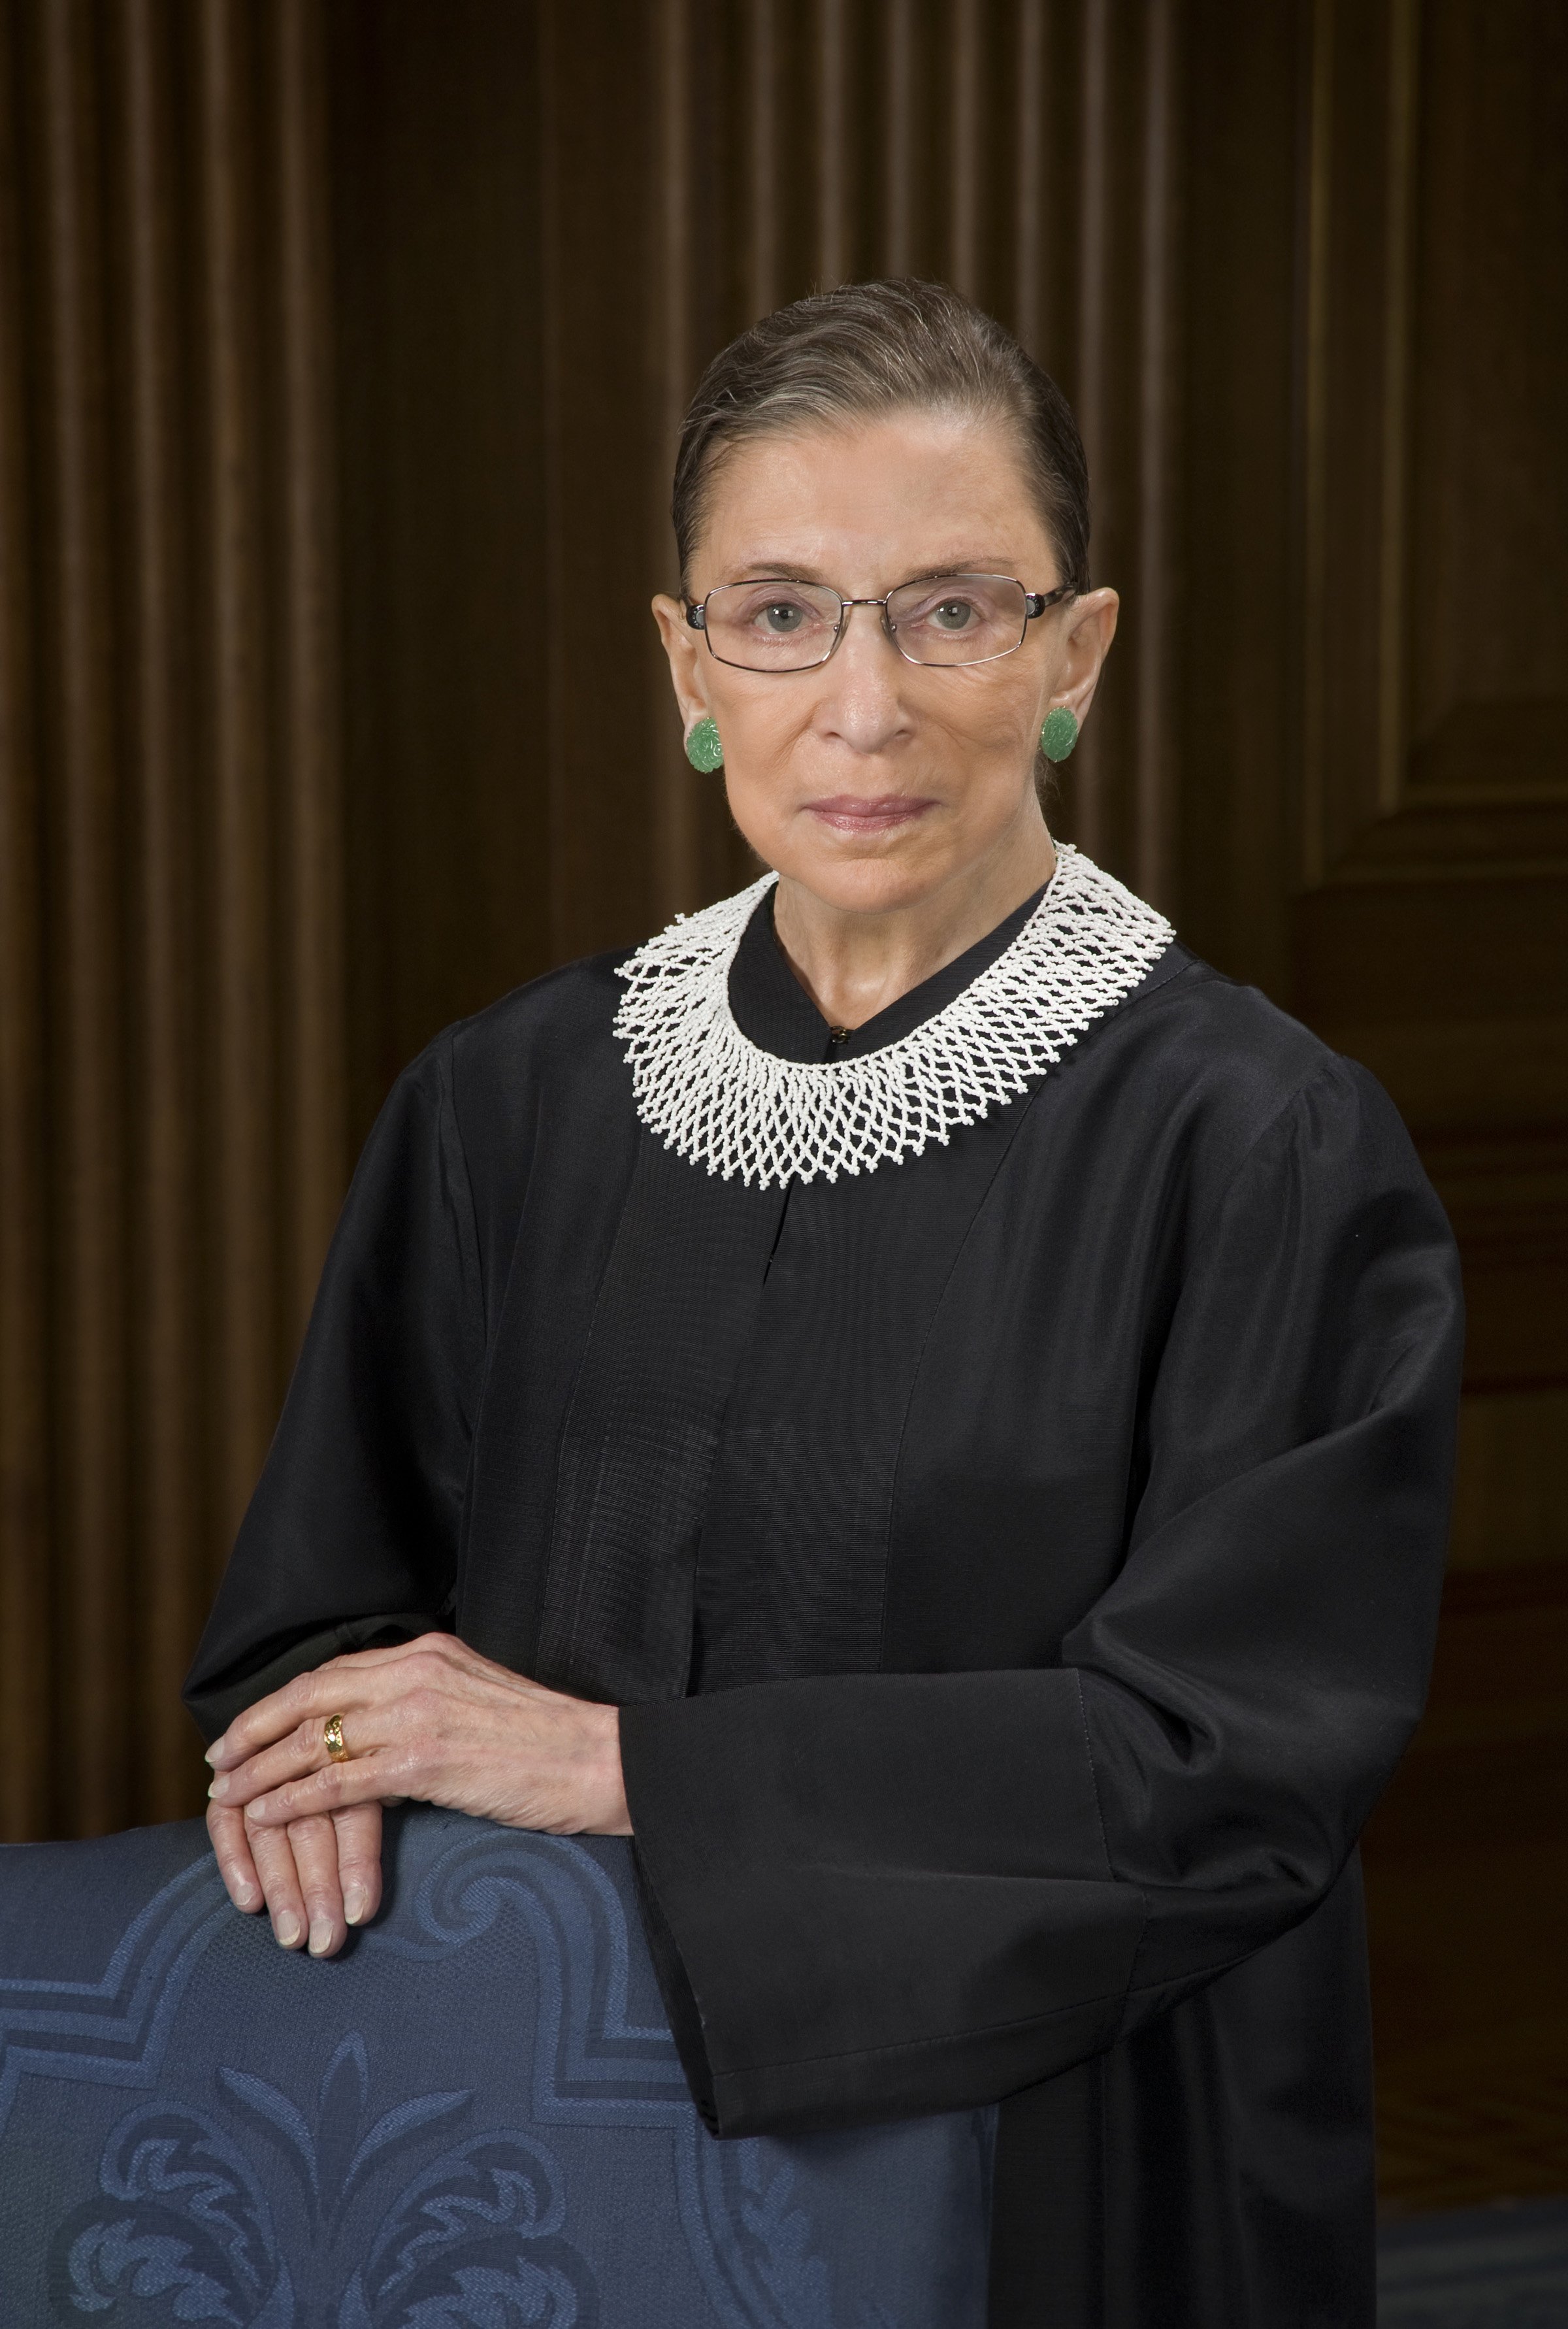 Supreme Court Justice Ruth Bader Ginsburg poses for a portrait photo on October 8, 2010 | Photo: Getty Images